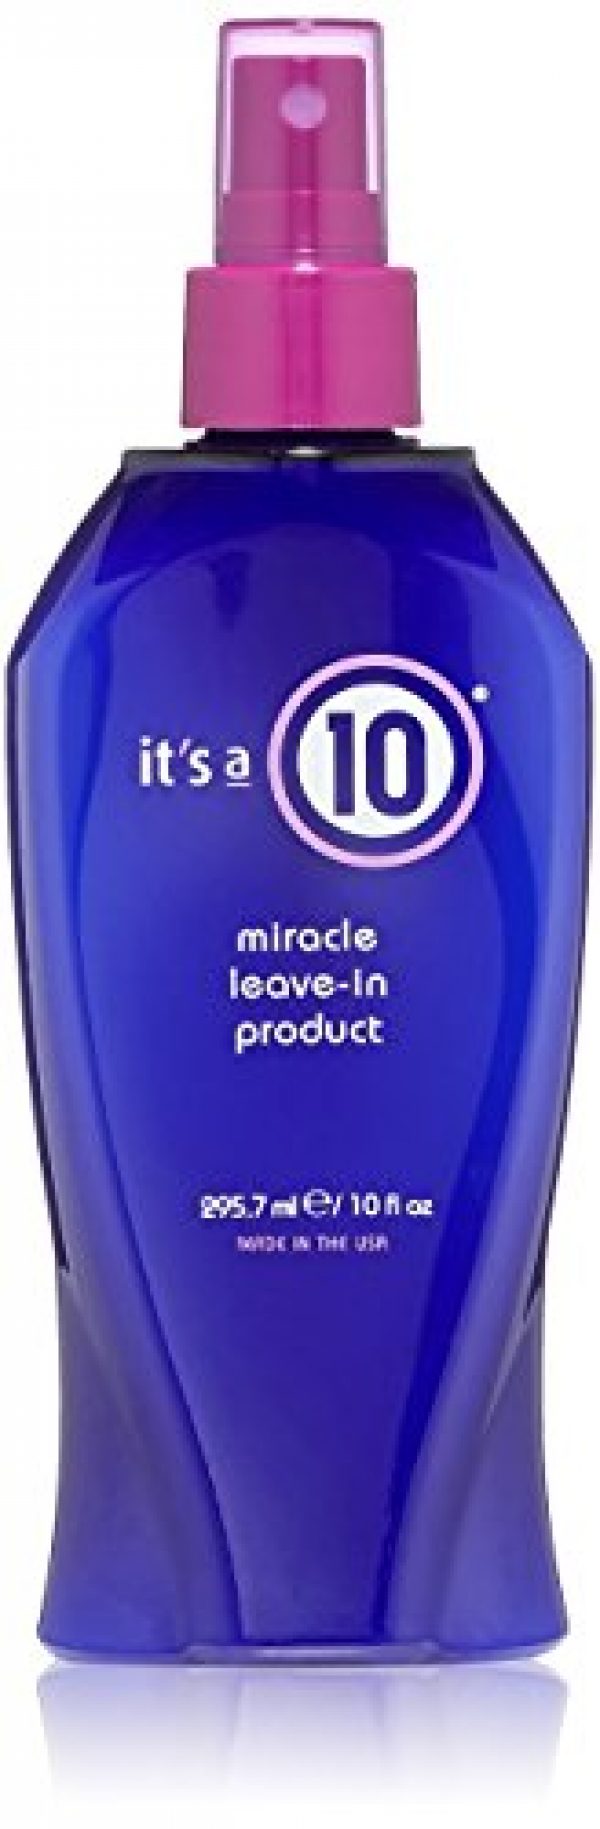 It's A 10 Haircare Miracle Leave-In Conditioner Spray - 10 oz. - 1ct 3